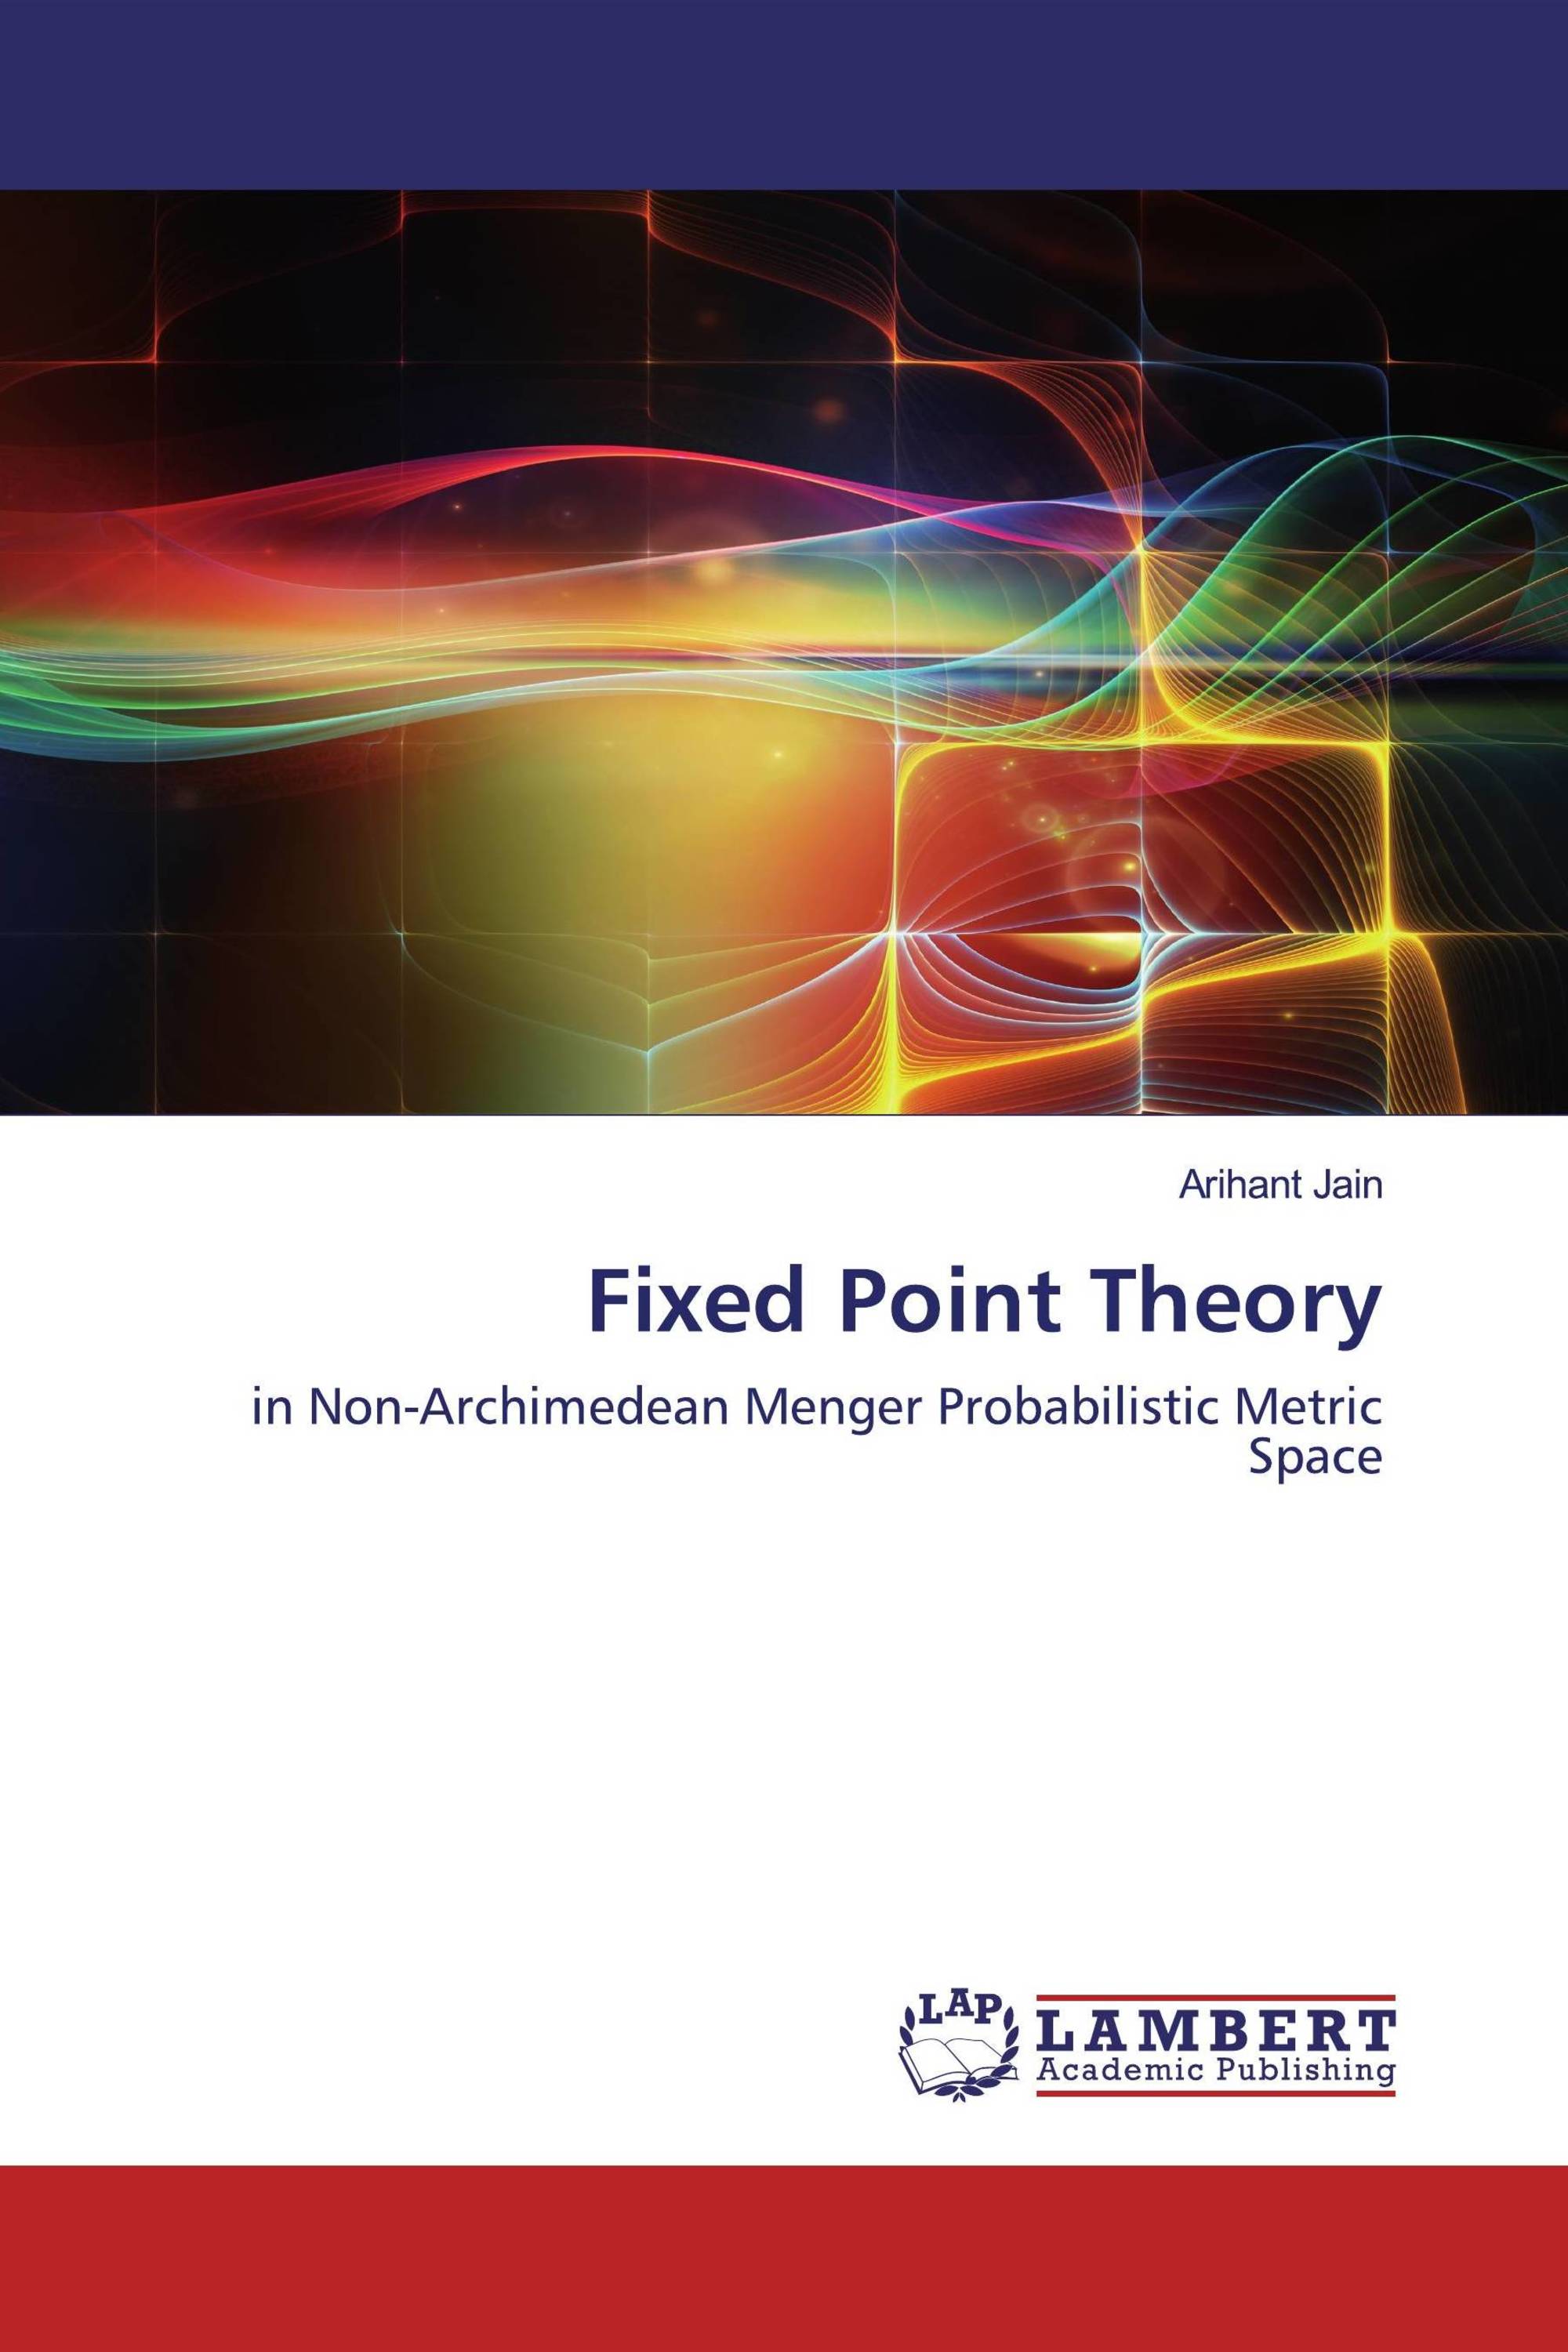 fixed point theory research paper